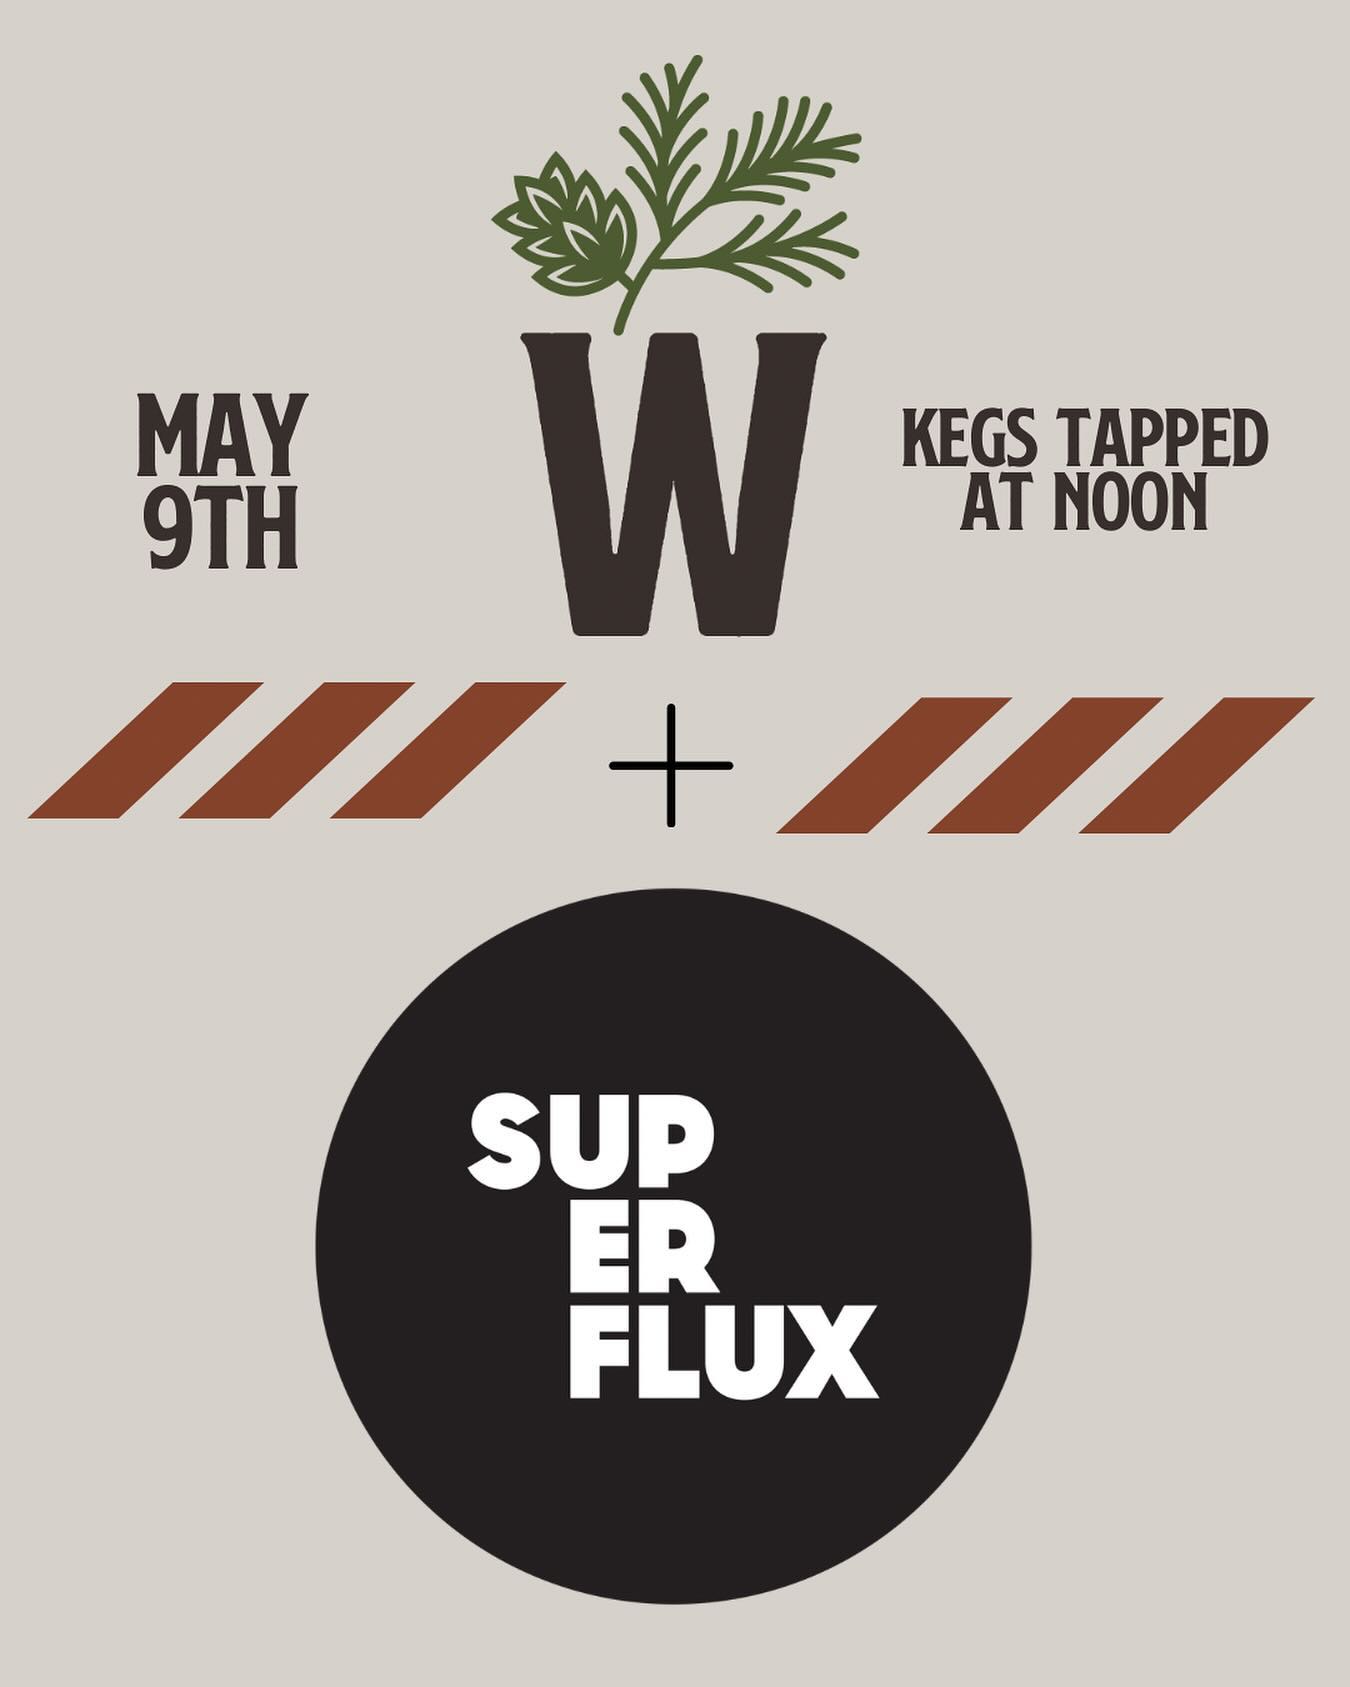 Oh my goodness it’s happening. This Thursday  we are welcoming Superflux out of Vancouver BC, Canada! We will have a pile of kegs being tapped at 12 noon, as well as cans available! 
.
Don’t miss out on this incredible brewery and opportunity to have from our neighbors up north! 
.
Many thanks to DayOne Distribution for making the impossible, possible. 
.
@superfluxbeer 
@dayonepdx 
.
.
.
.
.
#wildwoodtaphouse #wildwoodtap #superflux #superfluxbeer #canadianbeer #pnwbeer #pnw #canada #beerbeer #hillsboro #hillsborooregon #hillsborobeer